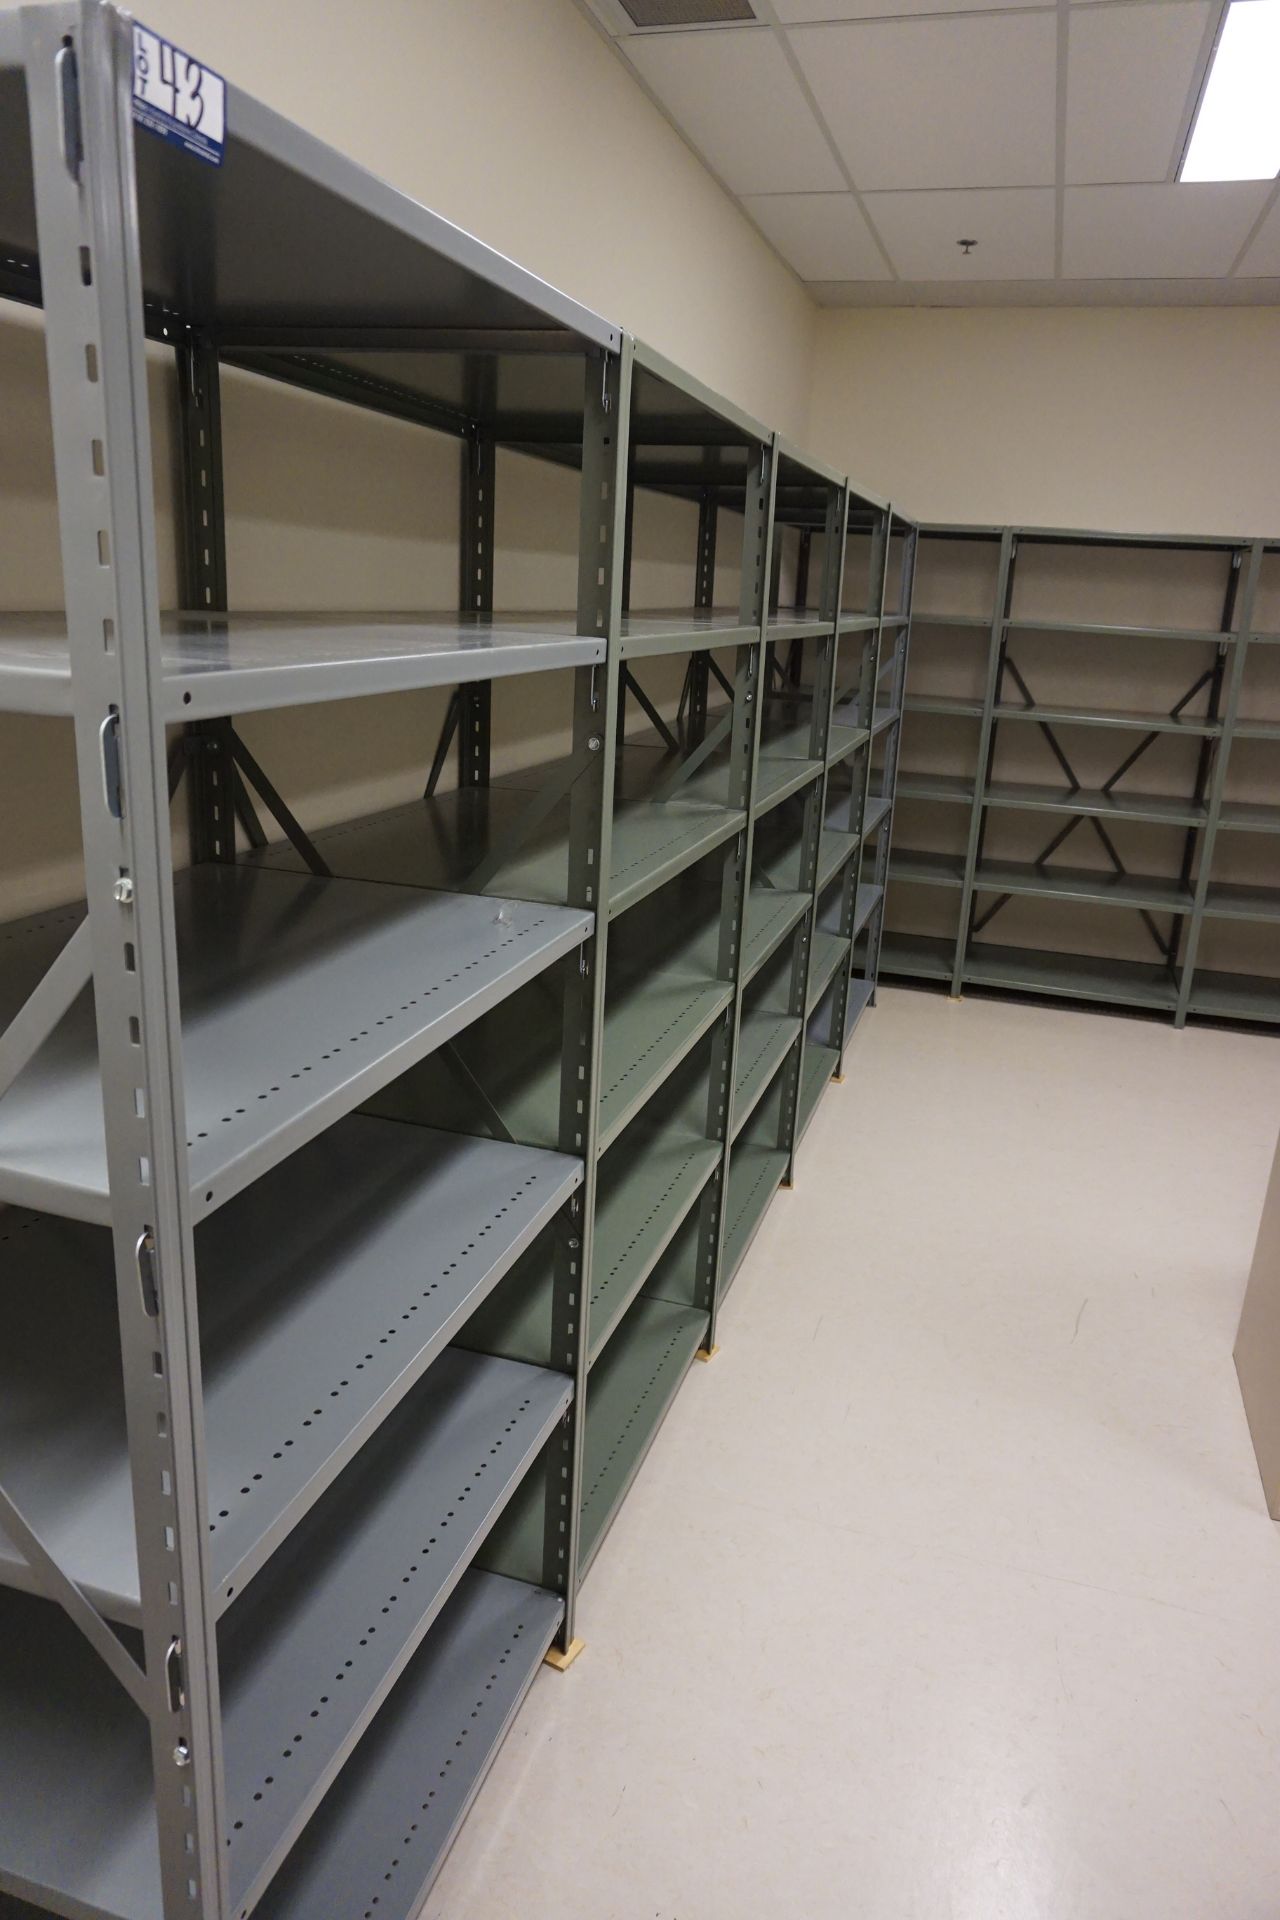 Sections of Clip Shelving